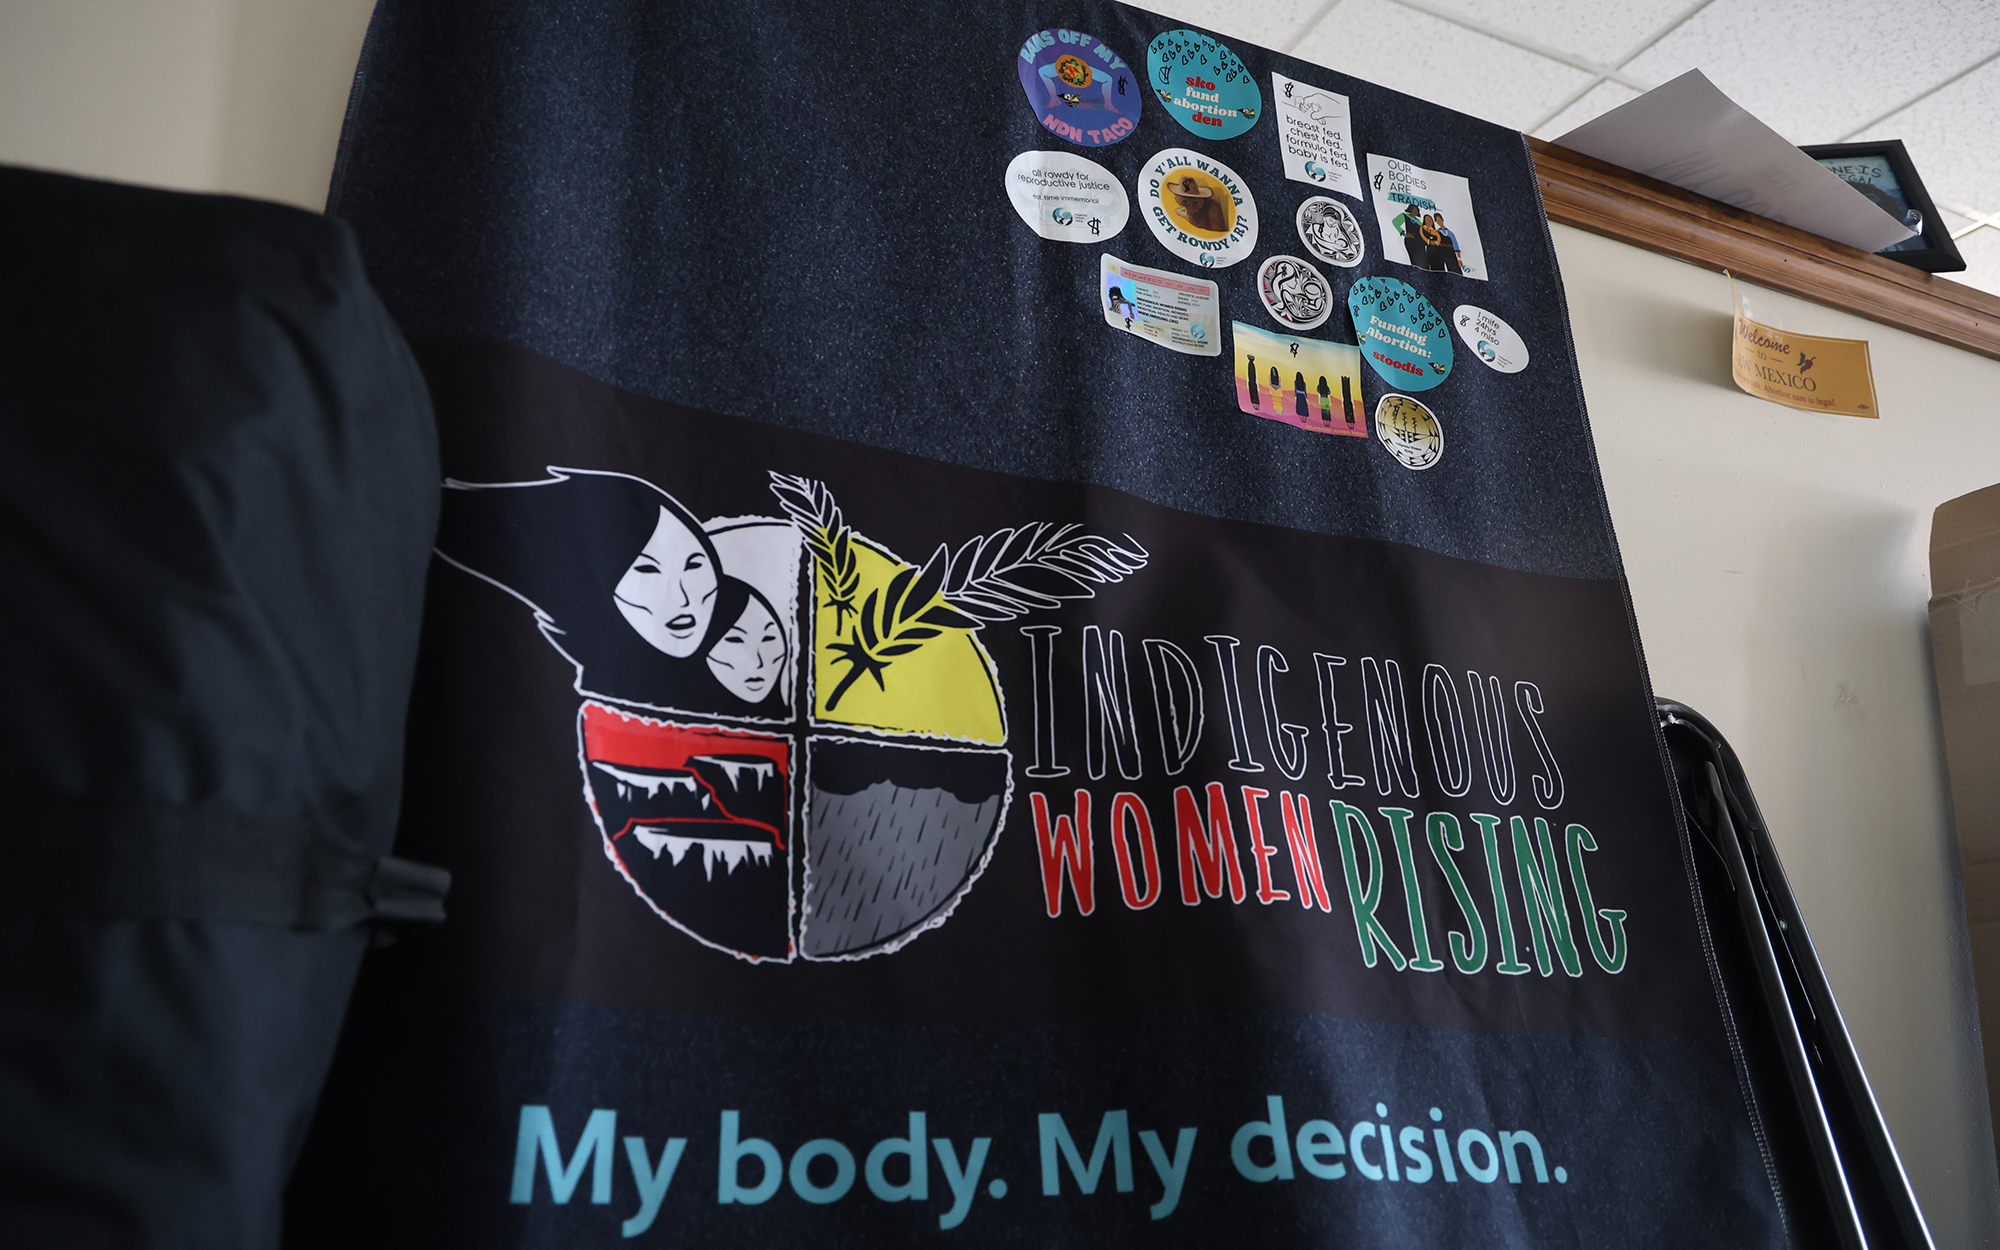 Indigenous Women Rising is a national fund that covers the costs of abortions – and the traditional ceremonies that follow – for Indigenous people. Since the reversal of Roe v. Wade, demand for the organization’s services has skyrocketed. (Photo by Noel Lyn Smith/News21)